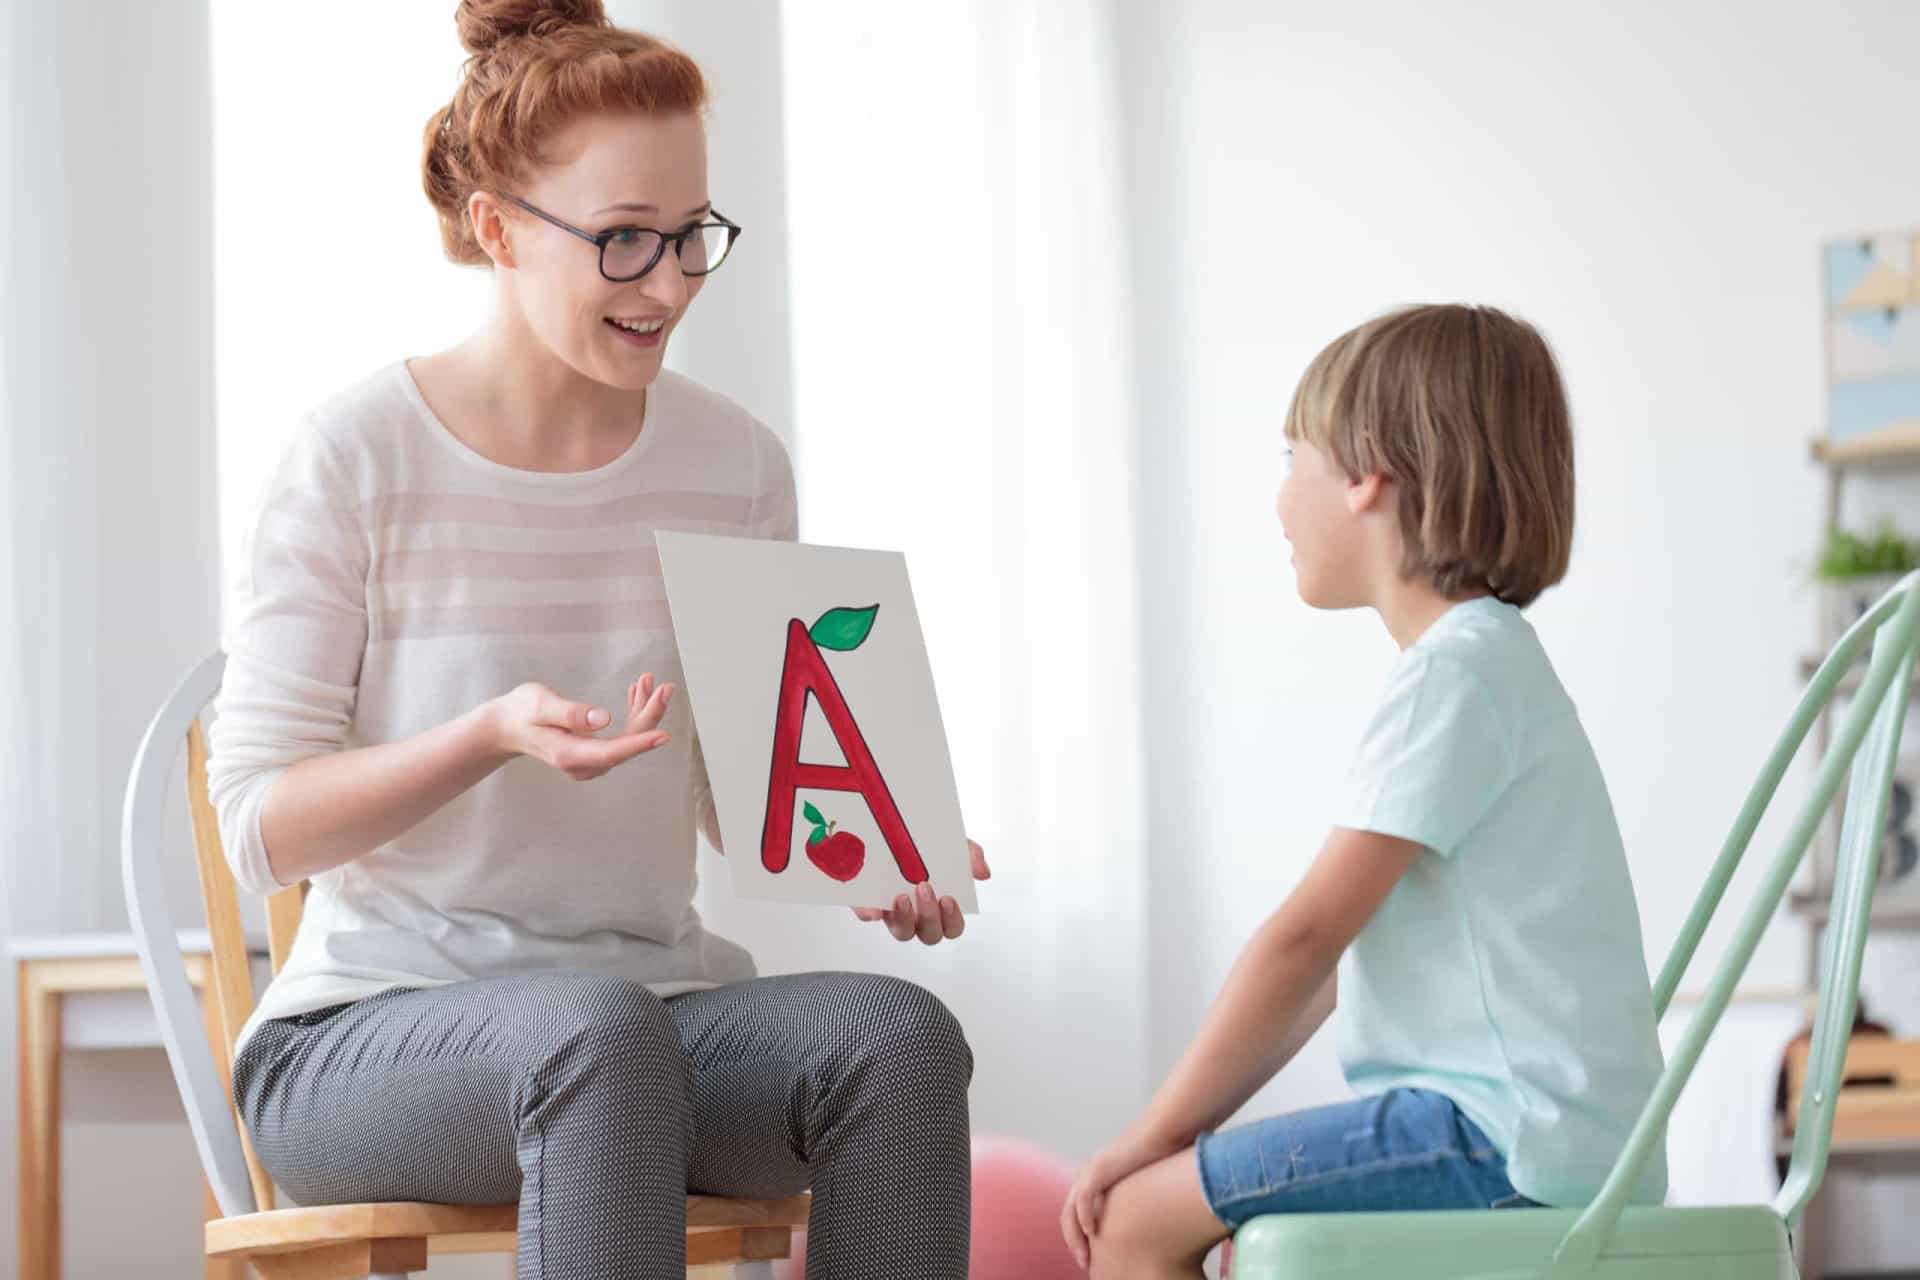 <p><span>If you suspect your child may have selective mutism and there is no help available at their school, seek a formal diagnosis from a speech and language therapist.</span></p><p>You may also like:<a href="https://www.starsinsider.com/n/324969?utm_source=msn.com&utm_medium=display&utm_campaign=referral_description&utm_content=521574en-us"> A history of political statements on the red carpet.</a></p>